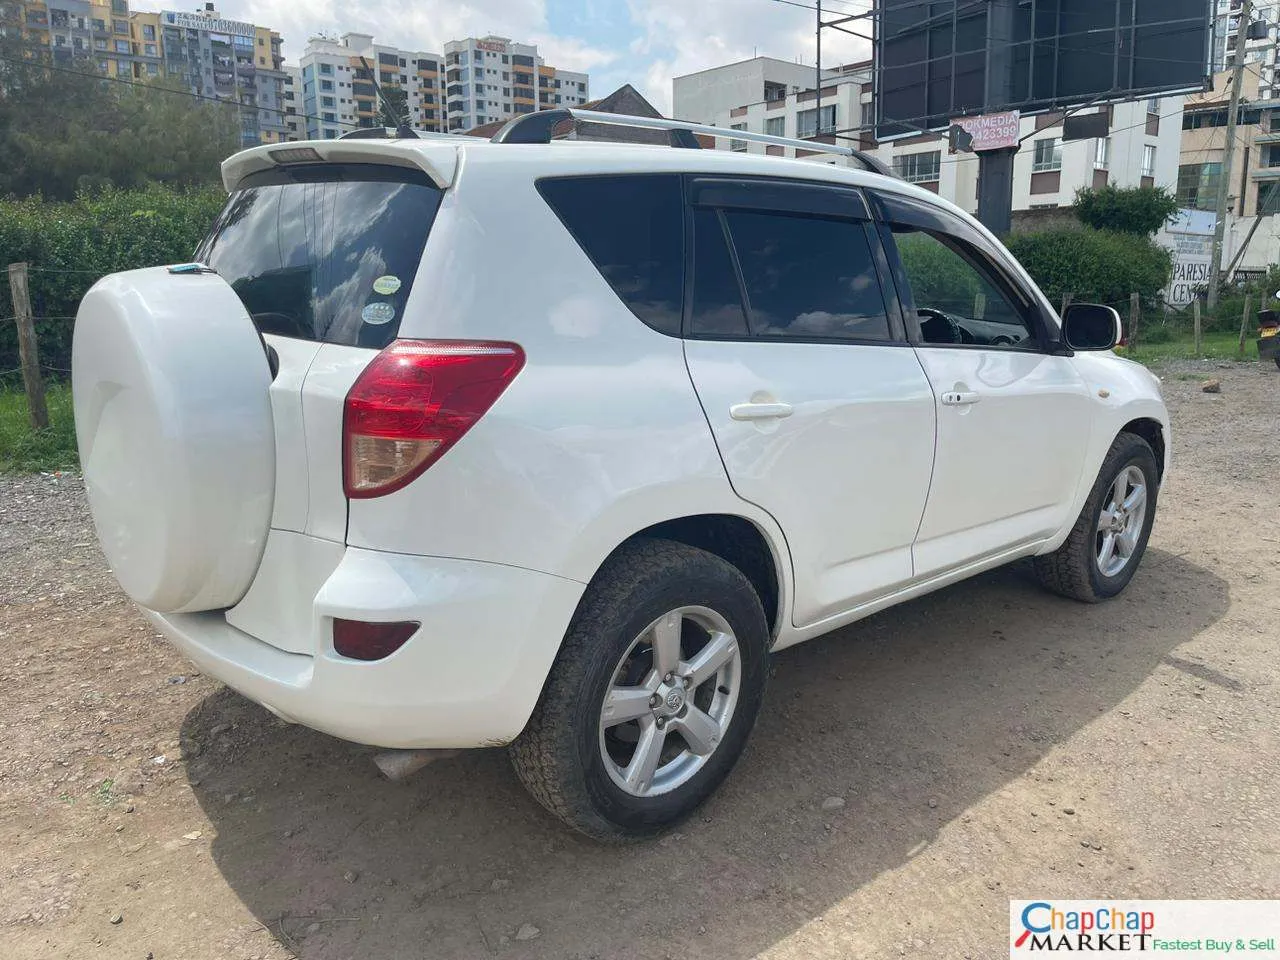 Cars Cars For Sale-Toyota RAV4 Asian Owner You Pay 30% Deposit Trade in OK EXCLUSIVE RAV4 for sale in Kenya hire purchase installments 3